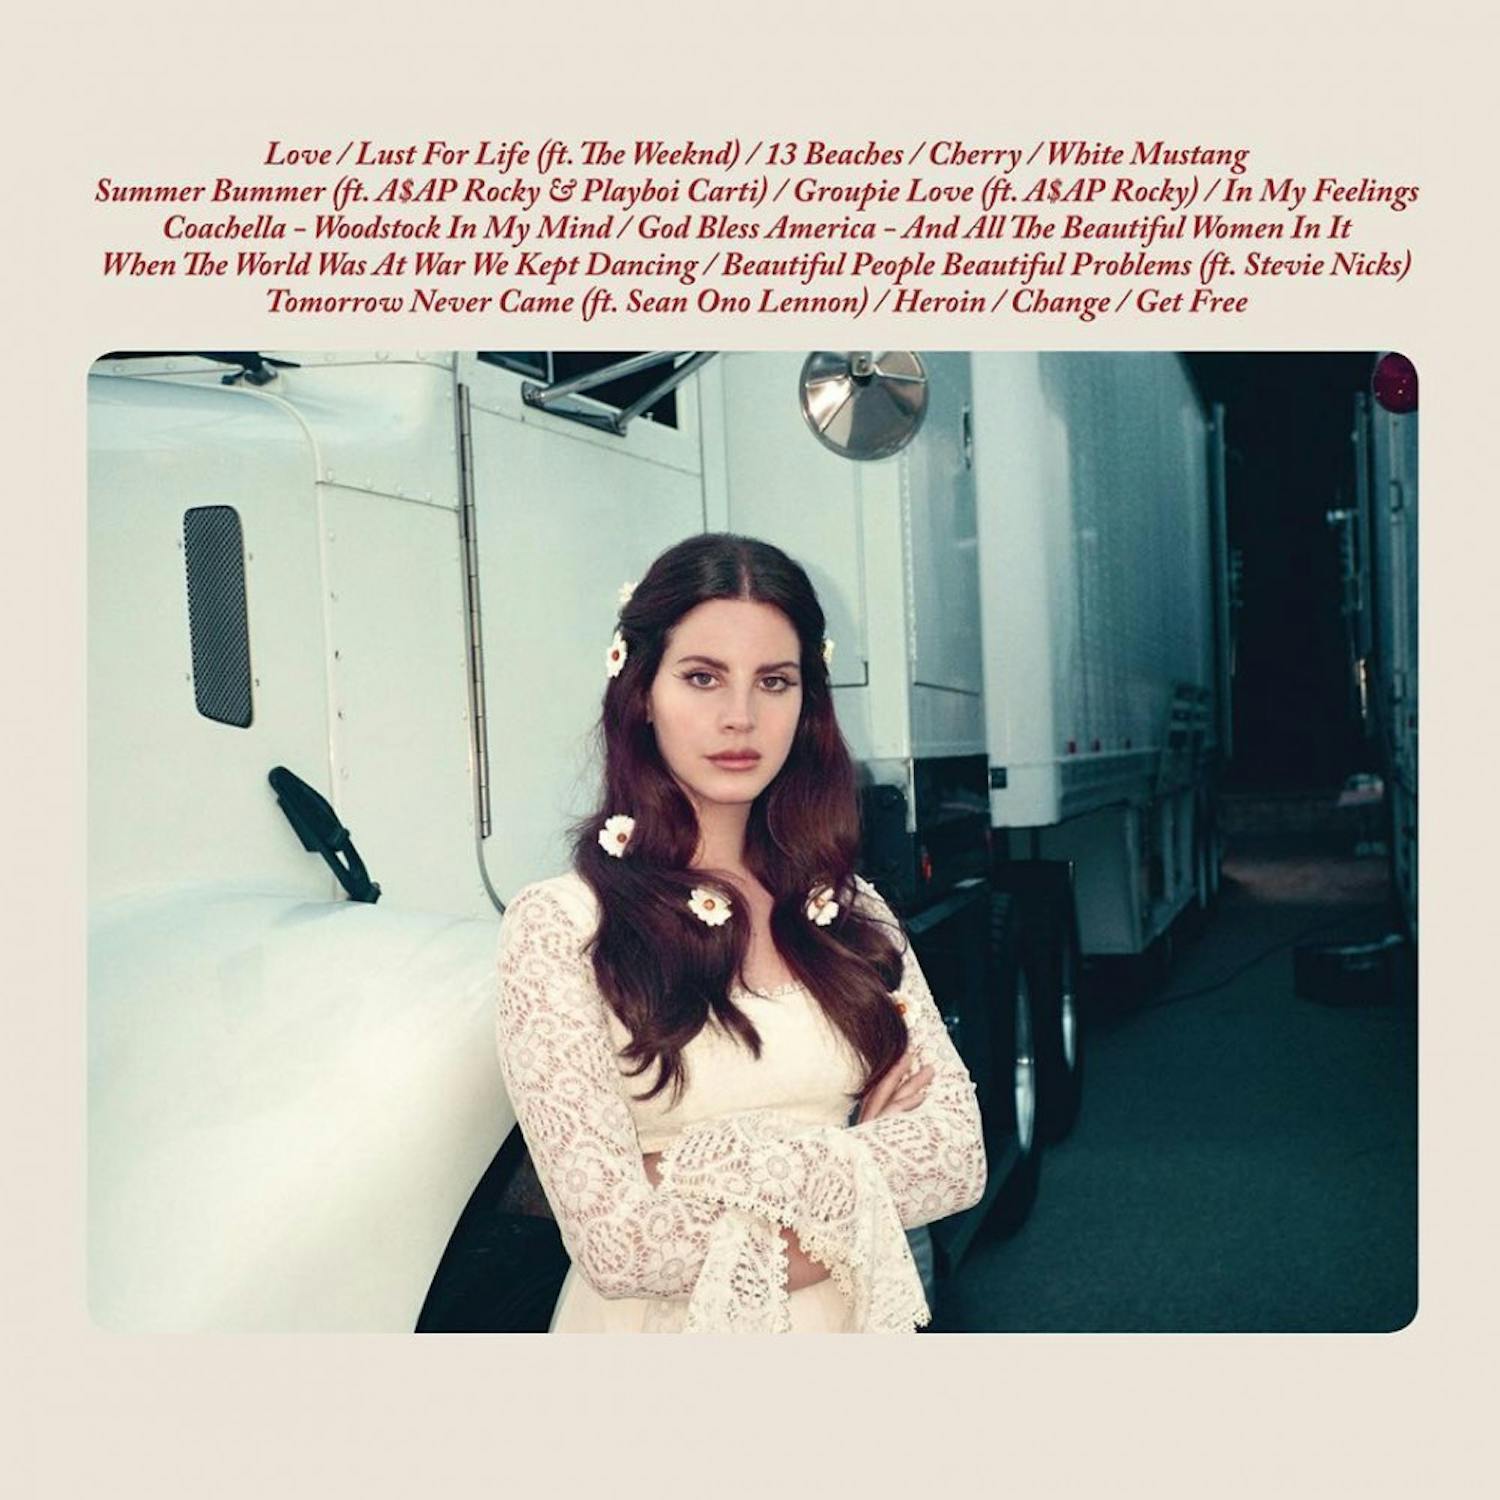 Lana Del Rey combined old and new in her latest record Lust for Life. (Photo via @lanadelrey Instagram)&nbsp;